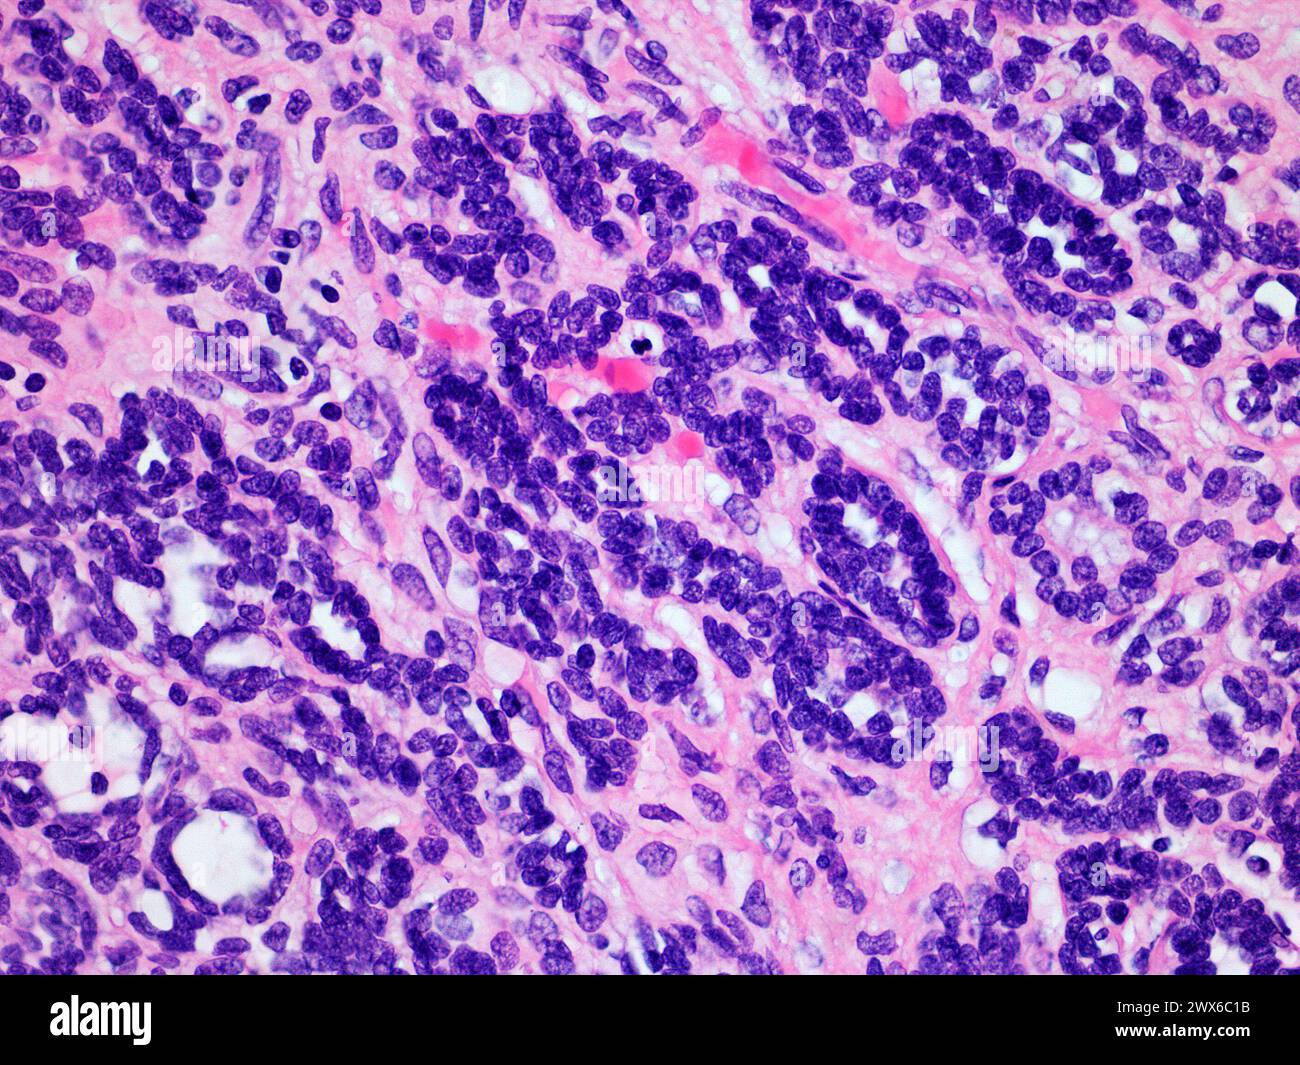 Microscopic Image of a Wilms Tumor or Nephroblastoma of a Childs Kidney Viewed at 400x Magnification with Hematoxylin and Eosin Staining Stock Photo